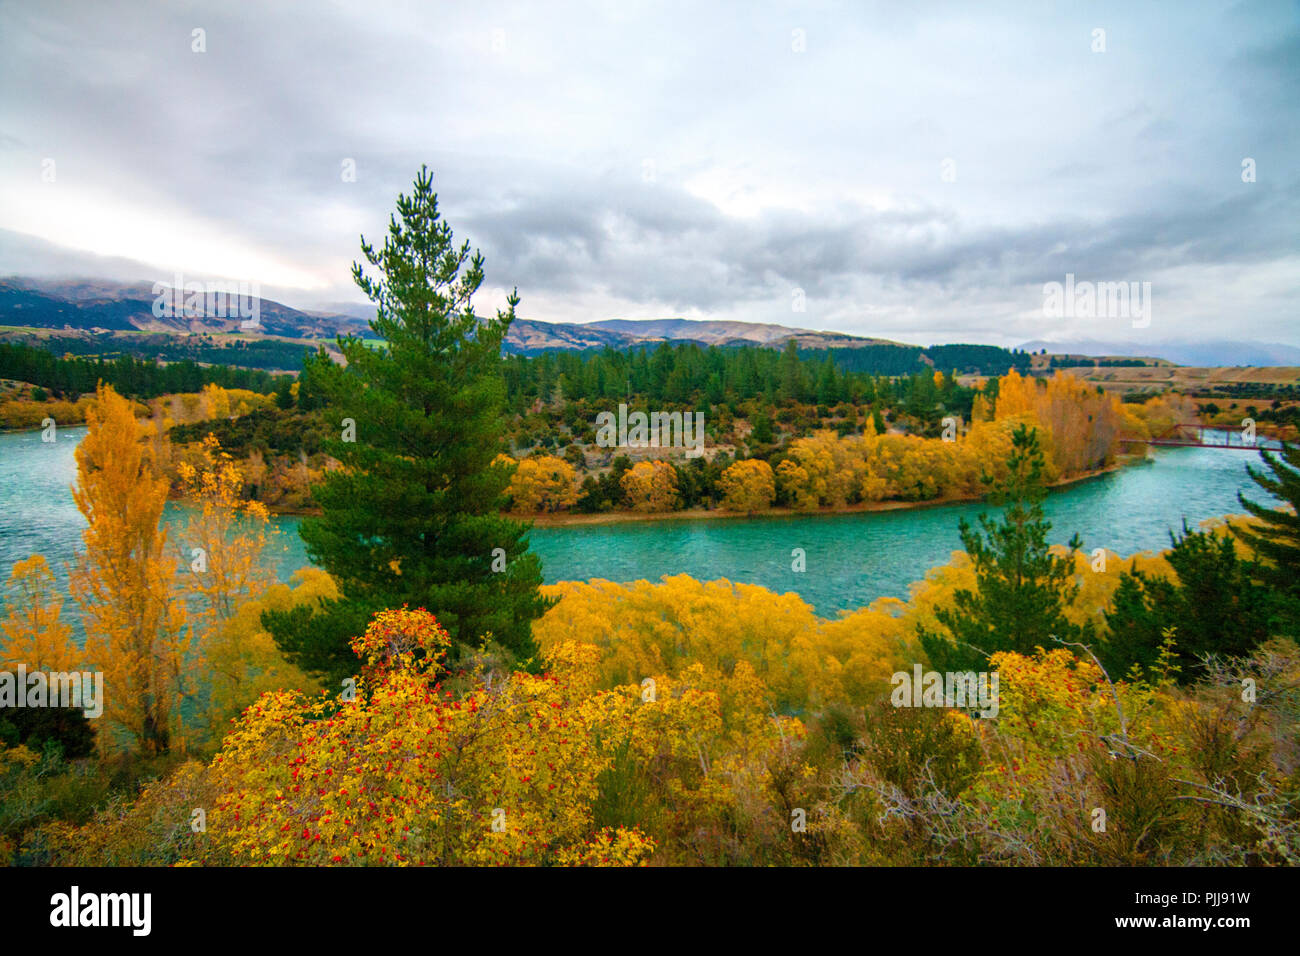 Emerald blue river, Clutha River, near Wanaka, New Zealand, autumn landscape with rose hips fruits, pine trees, river and coloured trees and bushes Stock Photo